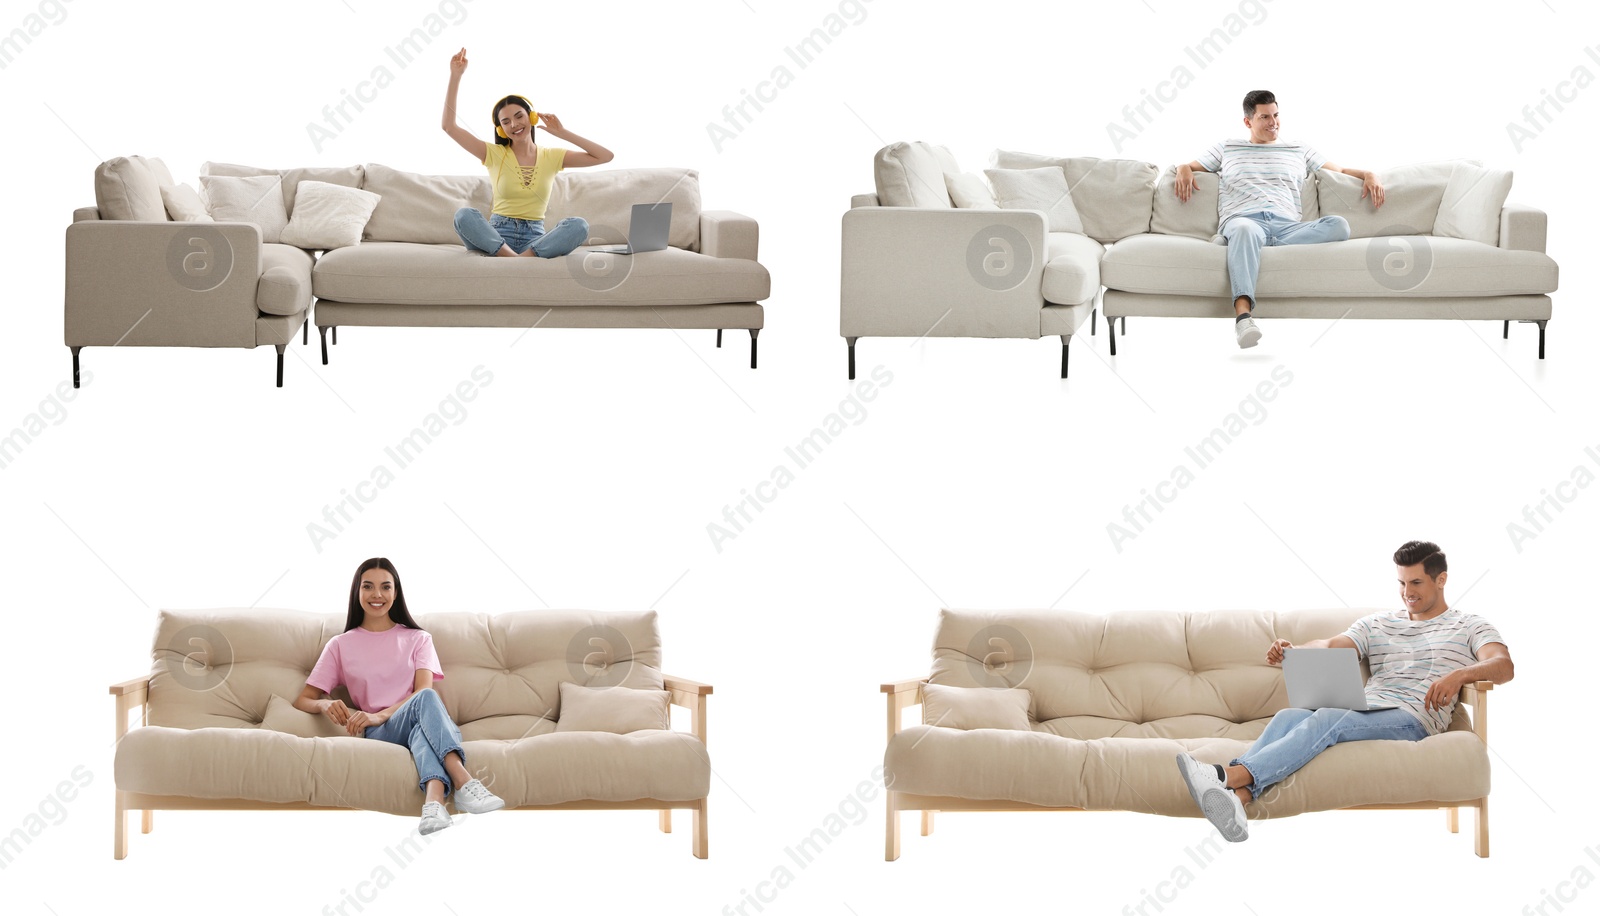 Image of People resting on different stylish sofas against white background, collage